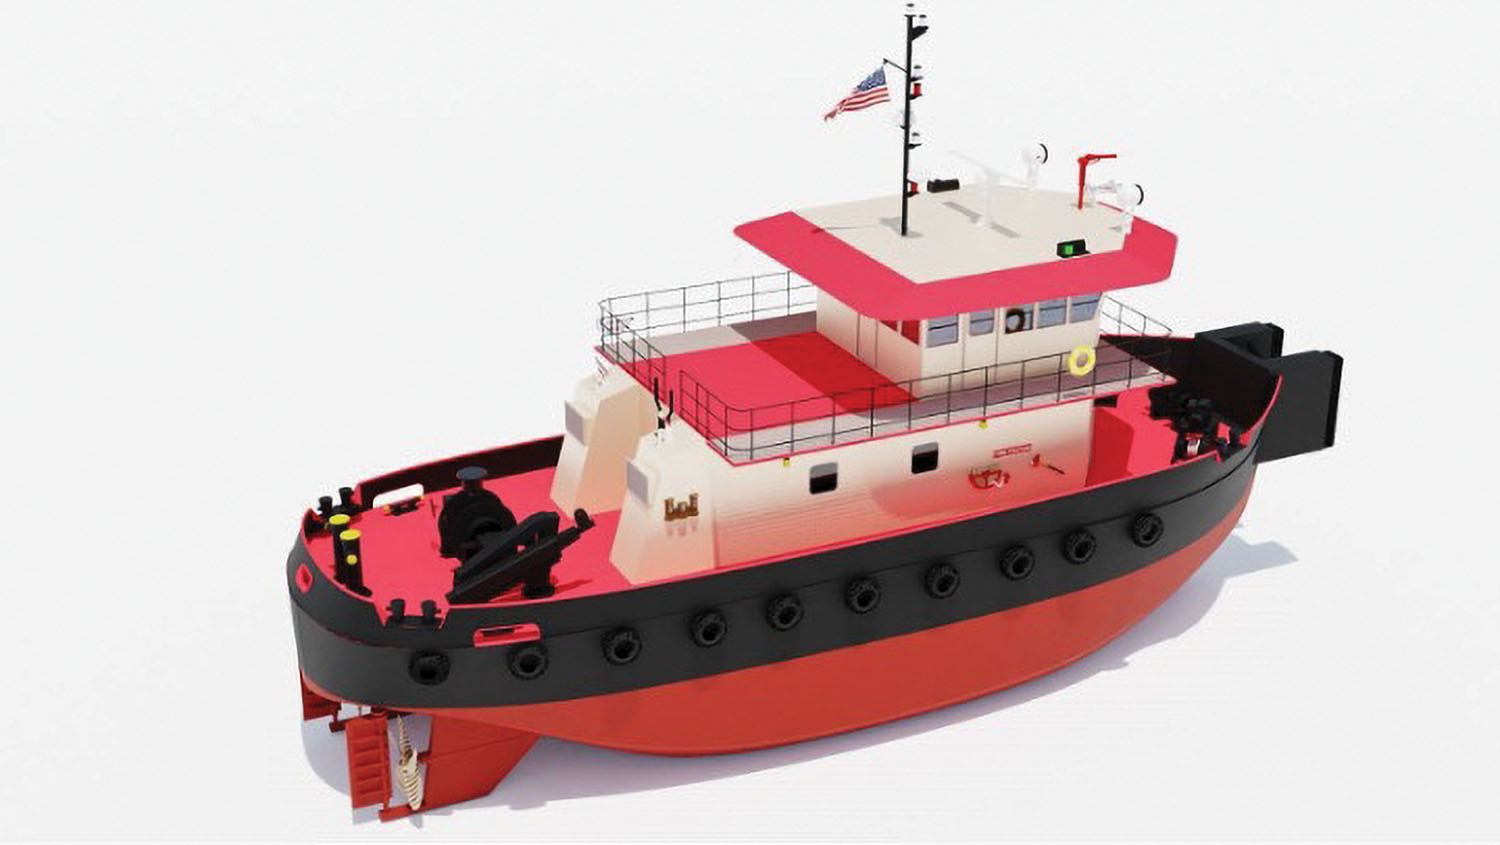 Rendering of new tug to operate on the St. Mary’s River, upper Great Lakes and Soo Harbor.